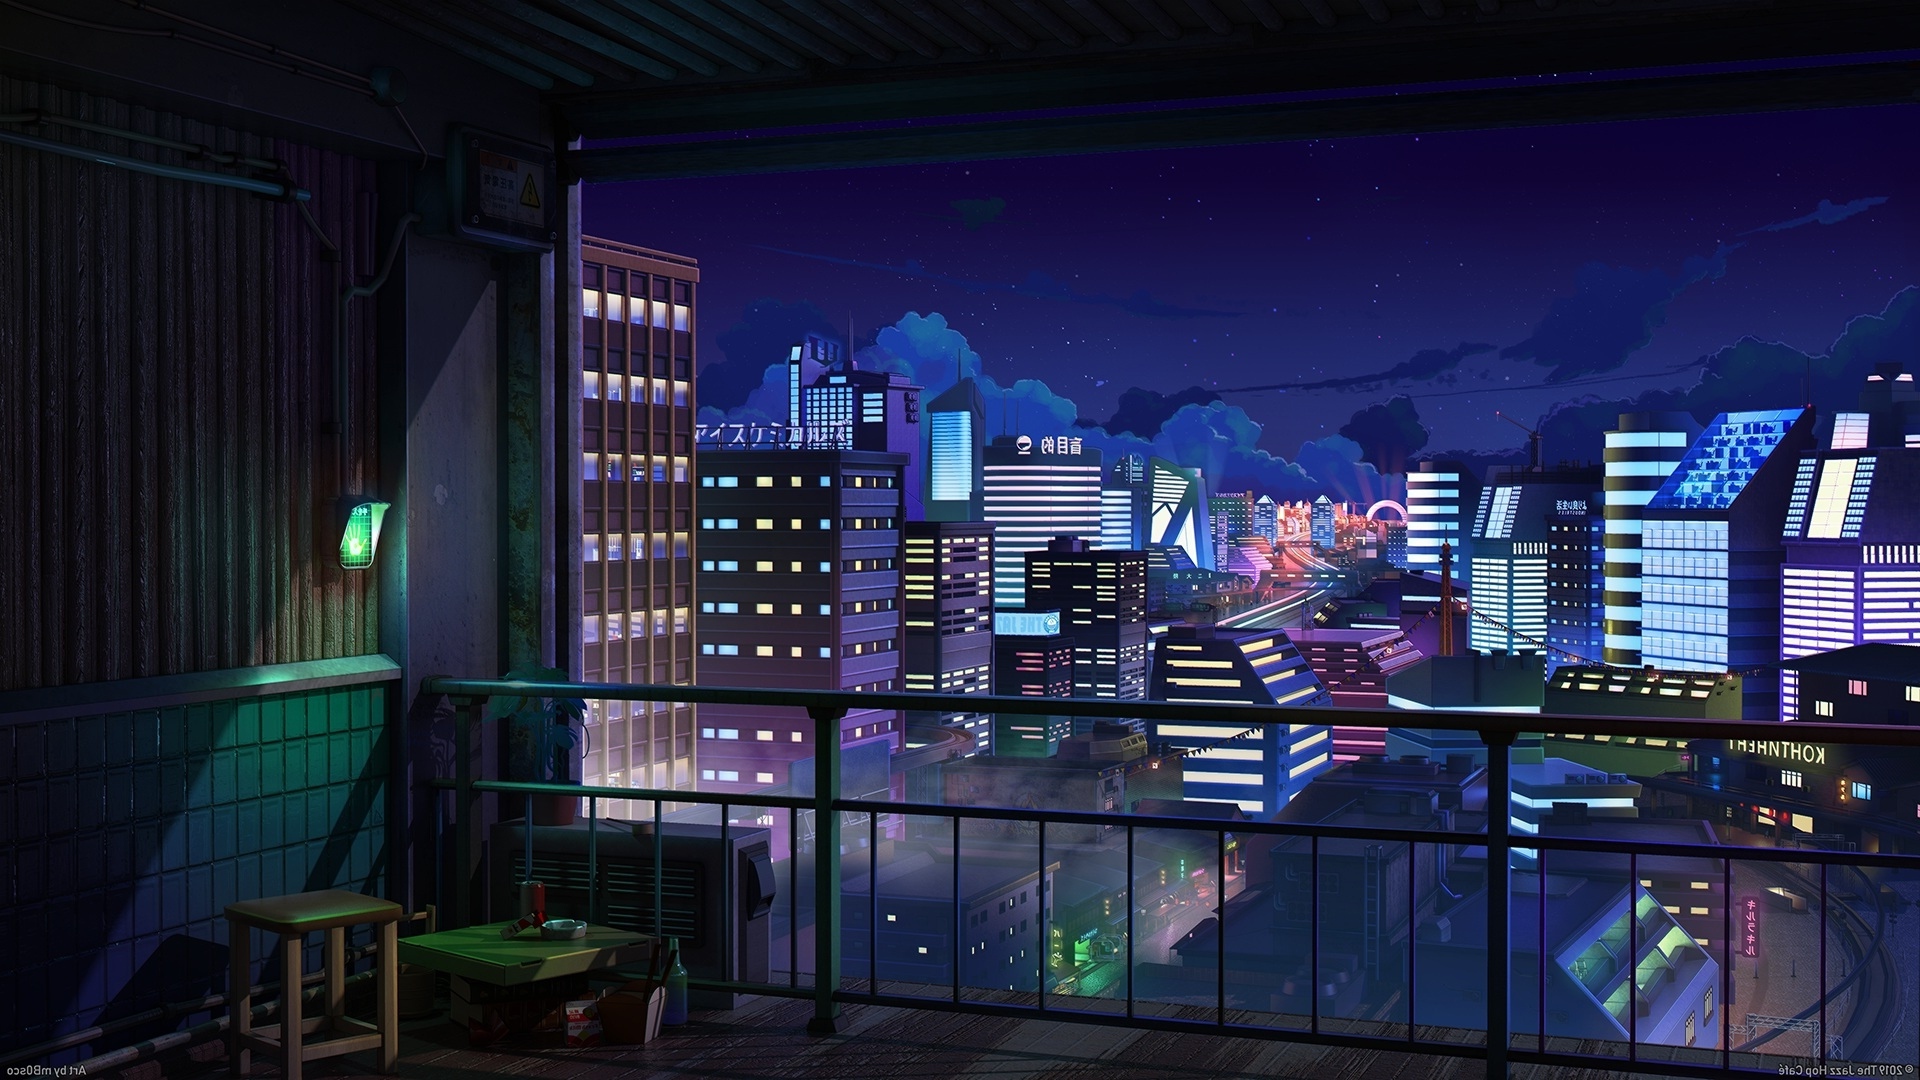 prompthunt: anime digital art view from castle balcony vibrant night sky  overlooking kingdom